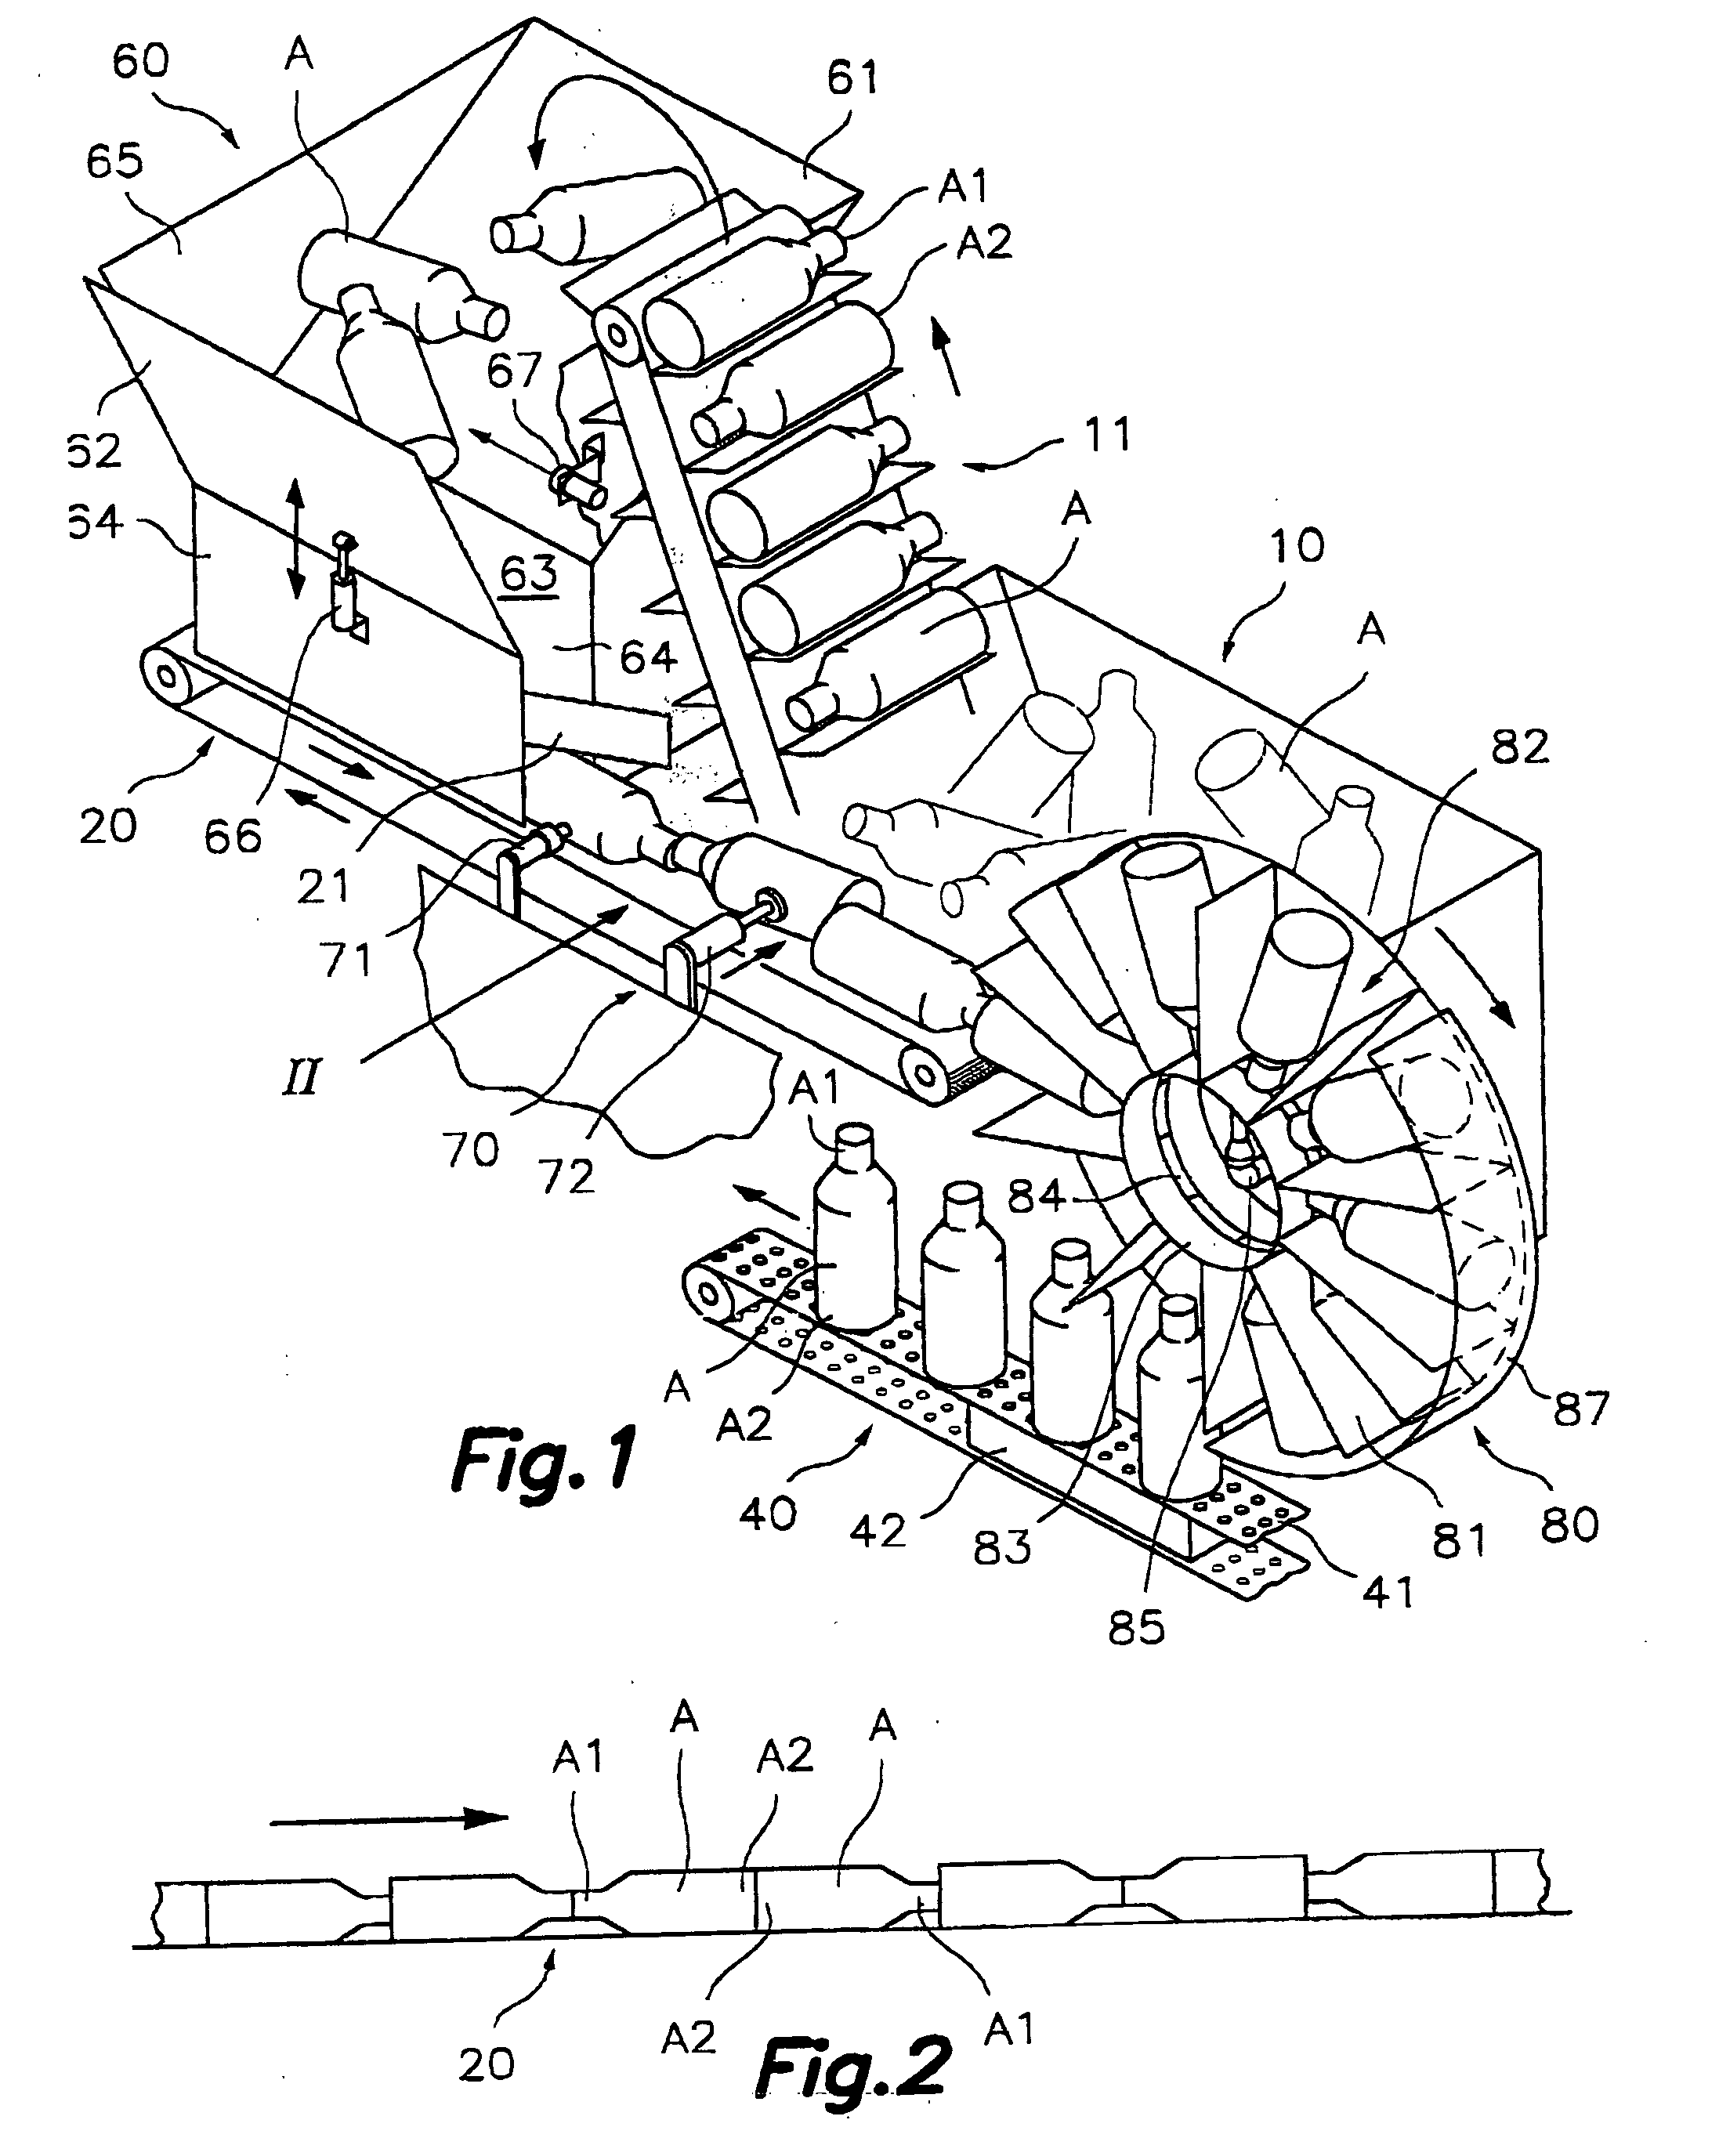 Automatic linear machine for orienting and aligning articles